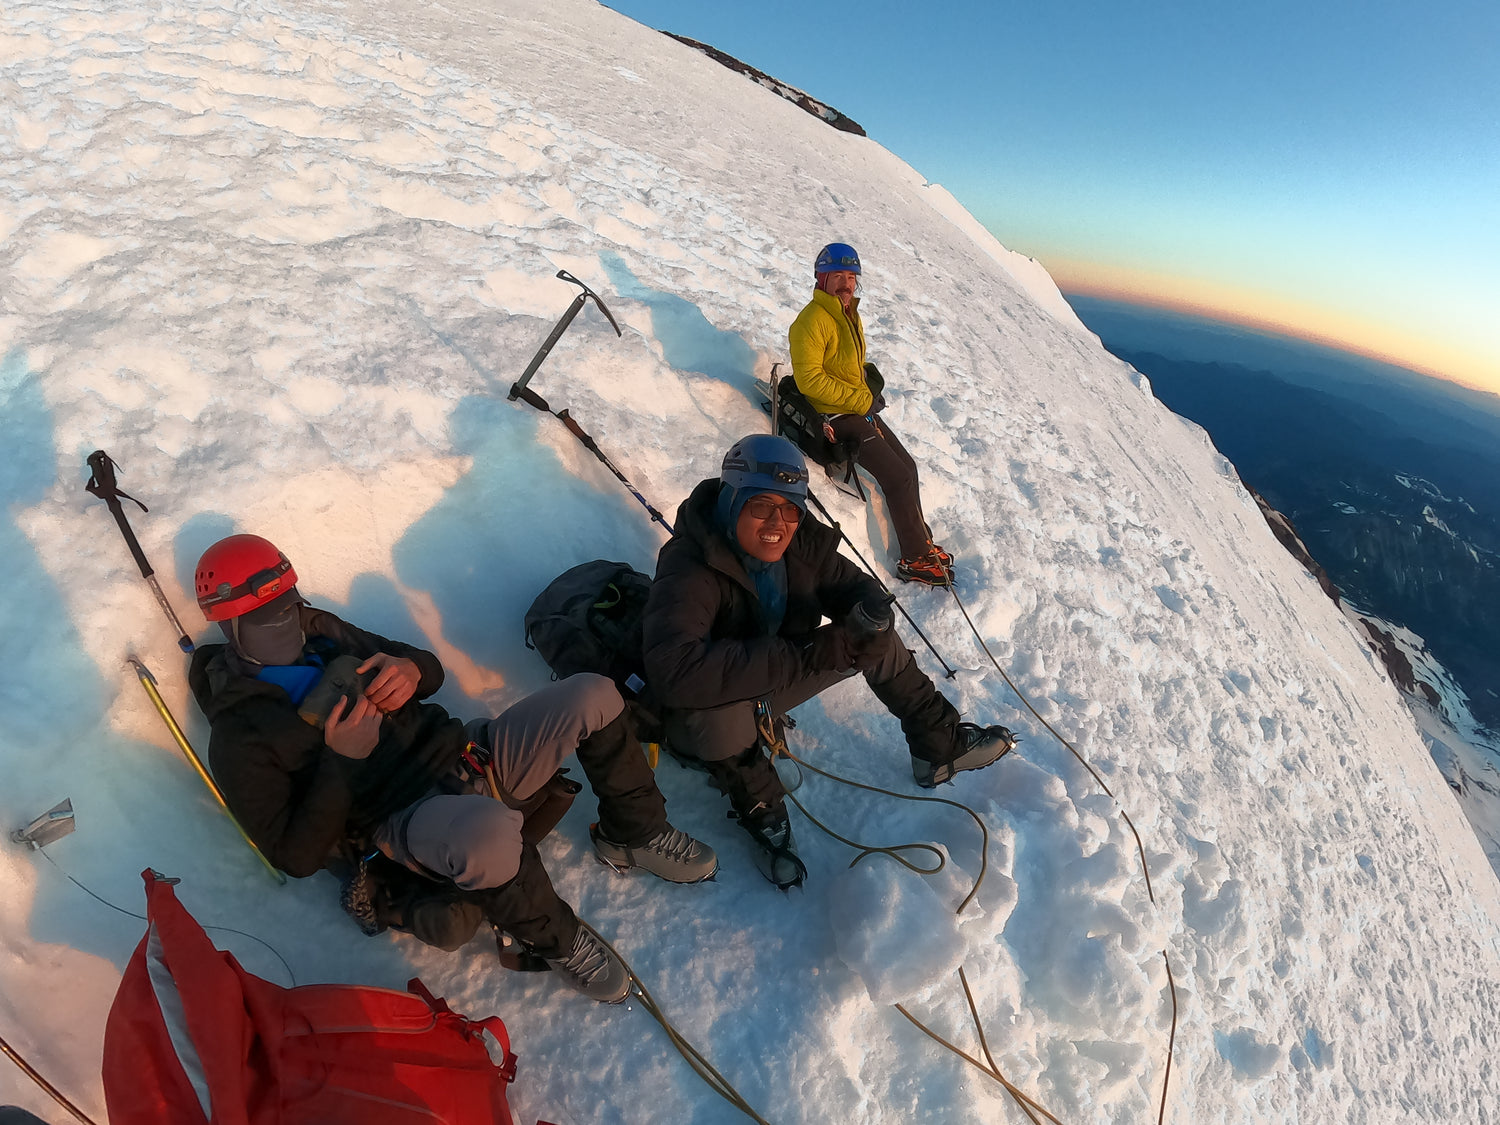 our guided group takes a break as the sun rises